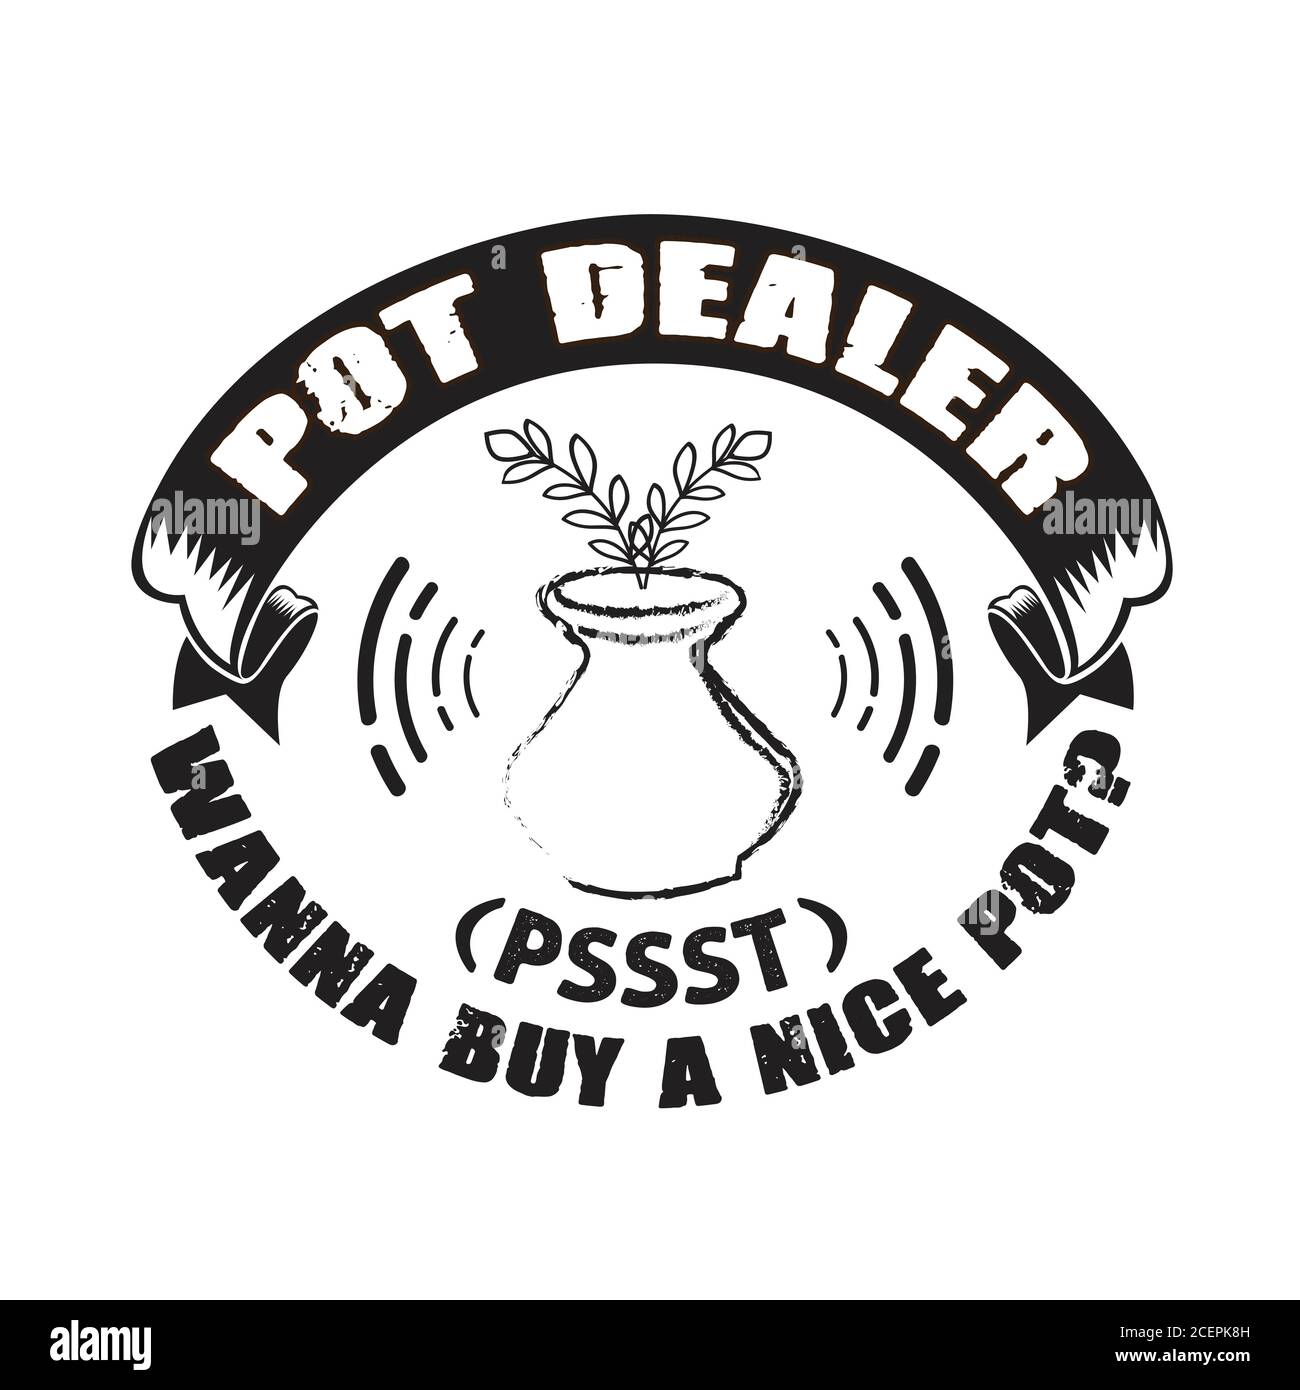 Pottery Quote and saying good for cricut. Pot Dealer wanna buy a nice pot Stock Vector